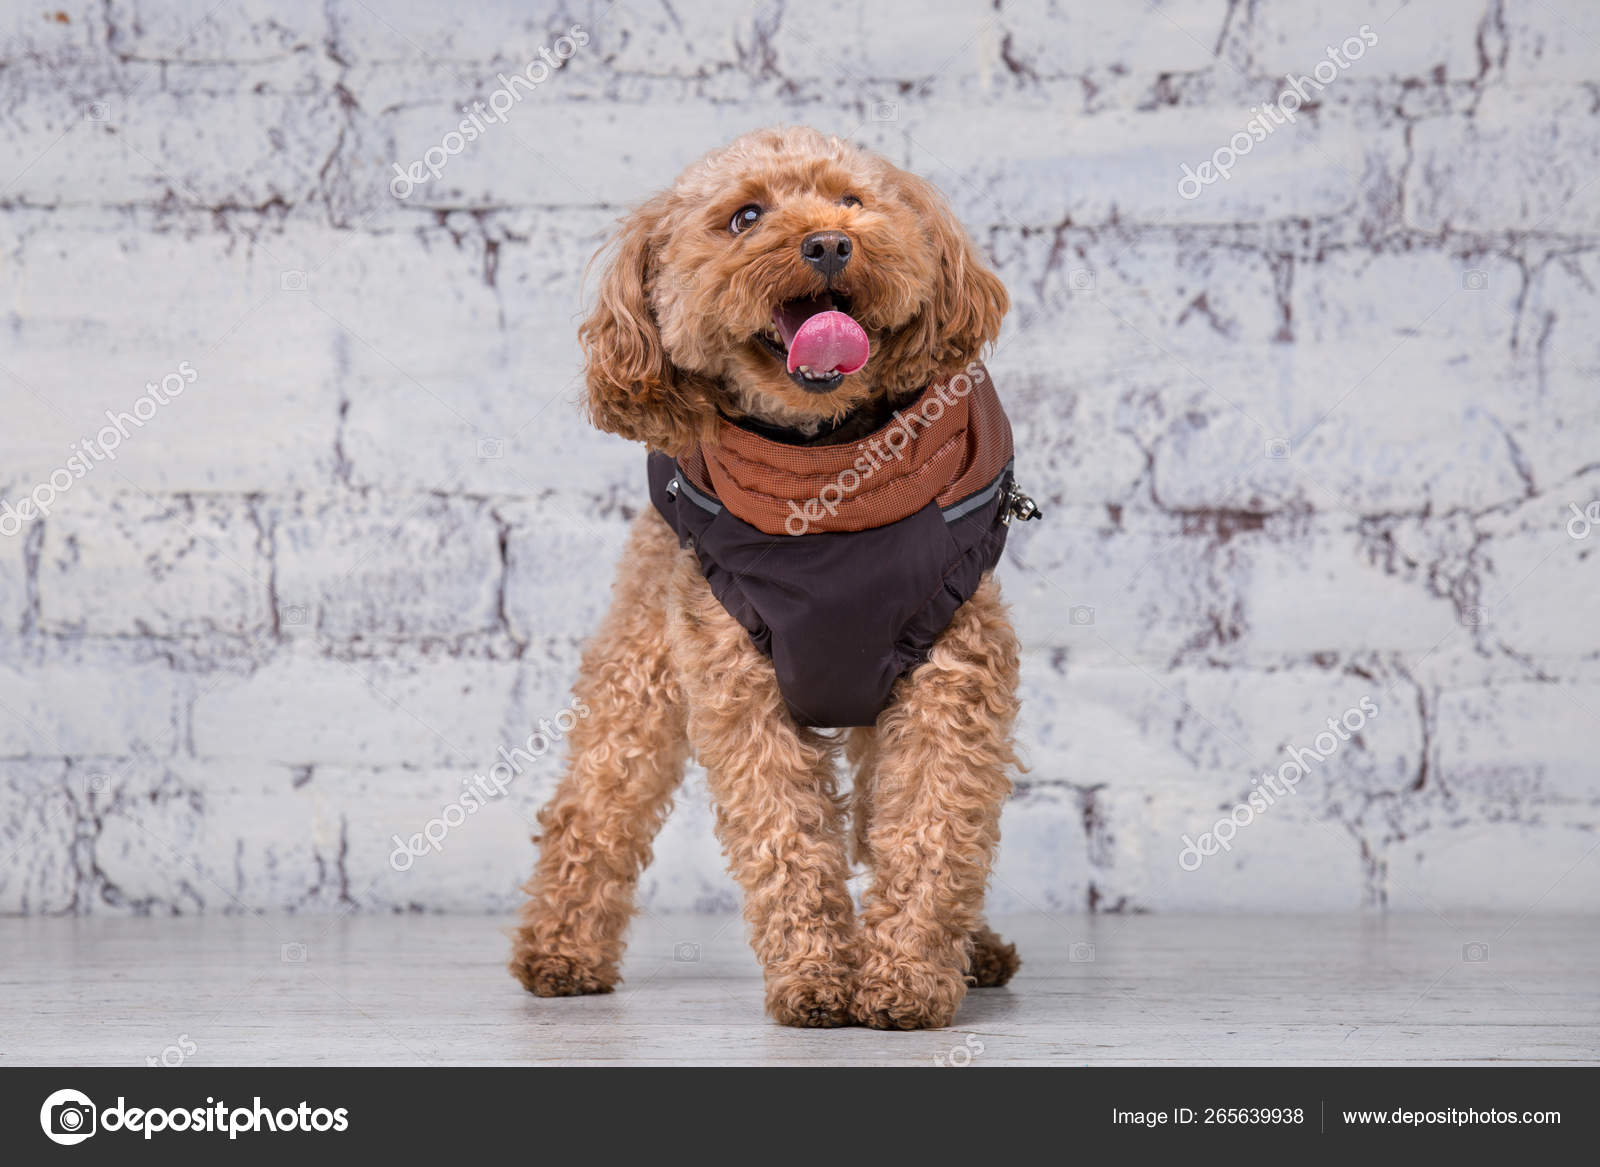 Small funny dog of brown color with curly hair of toy poodle breed posing  in clothes